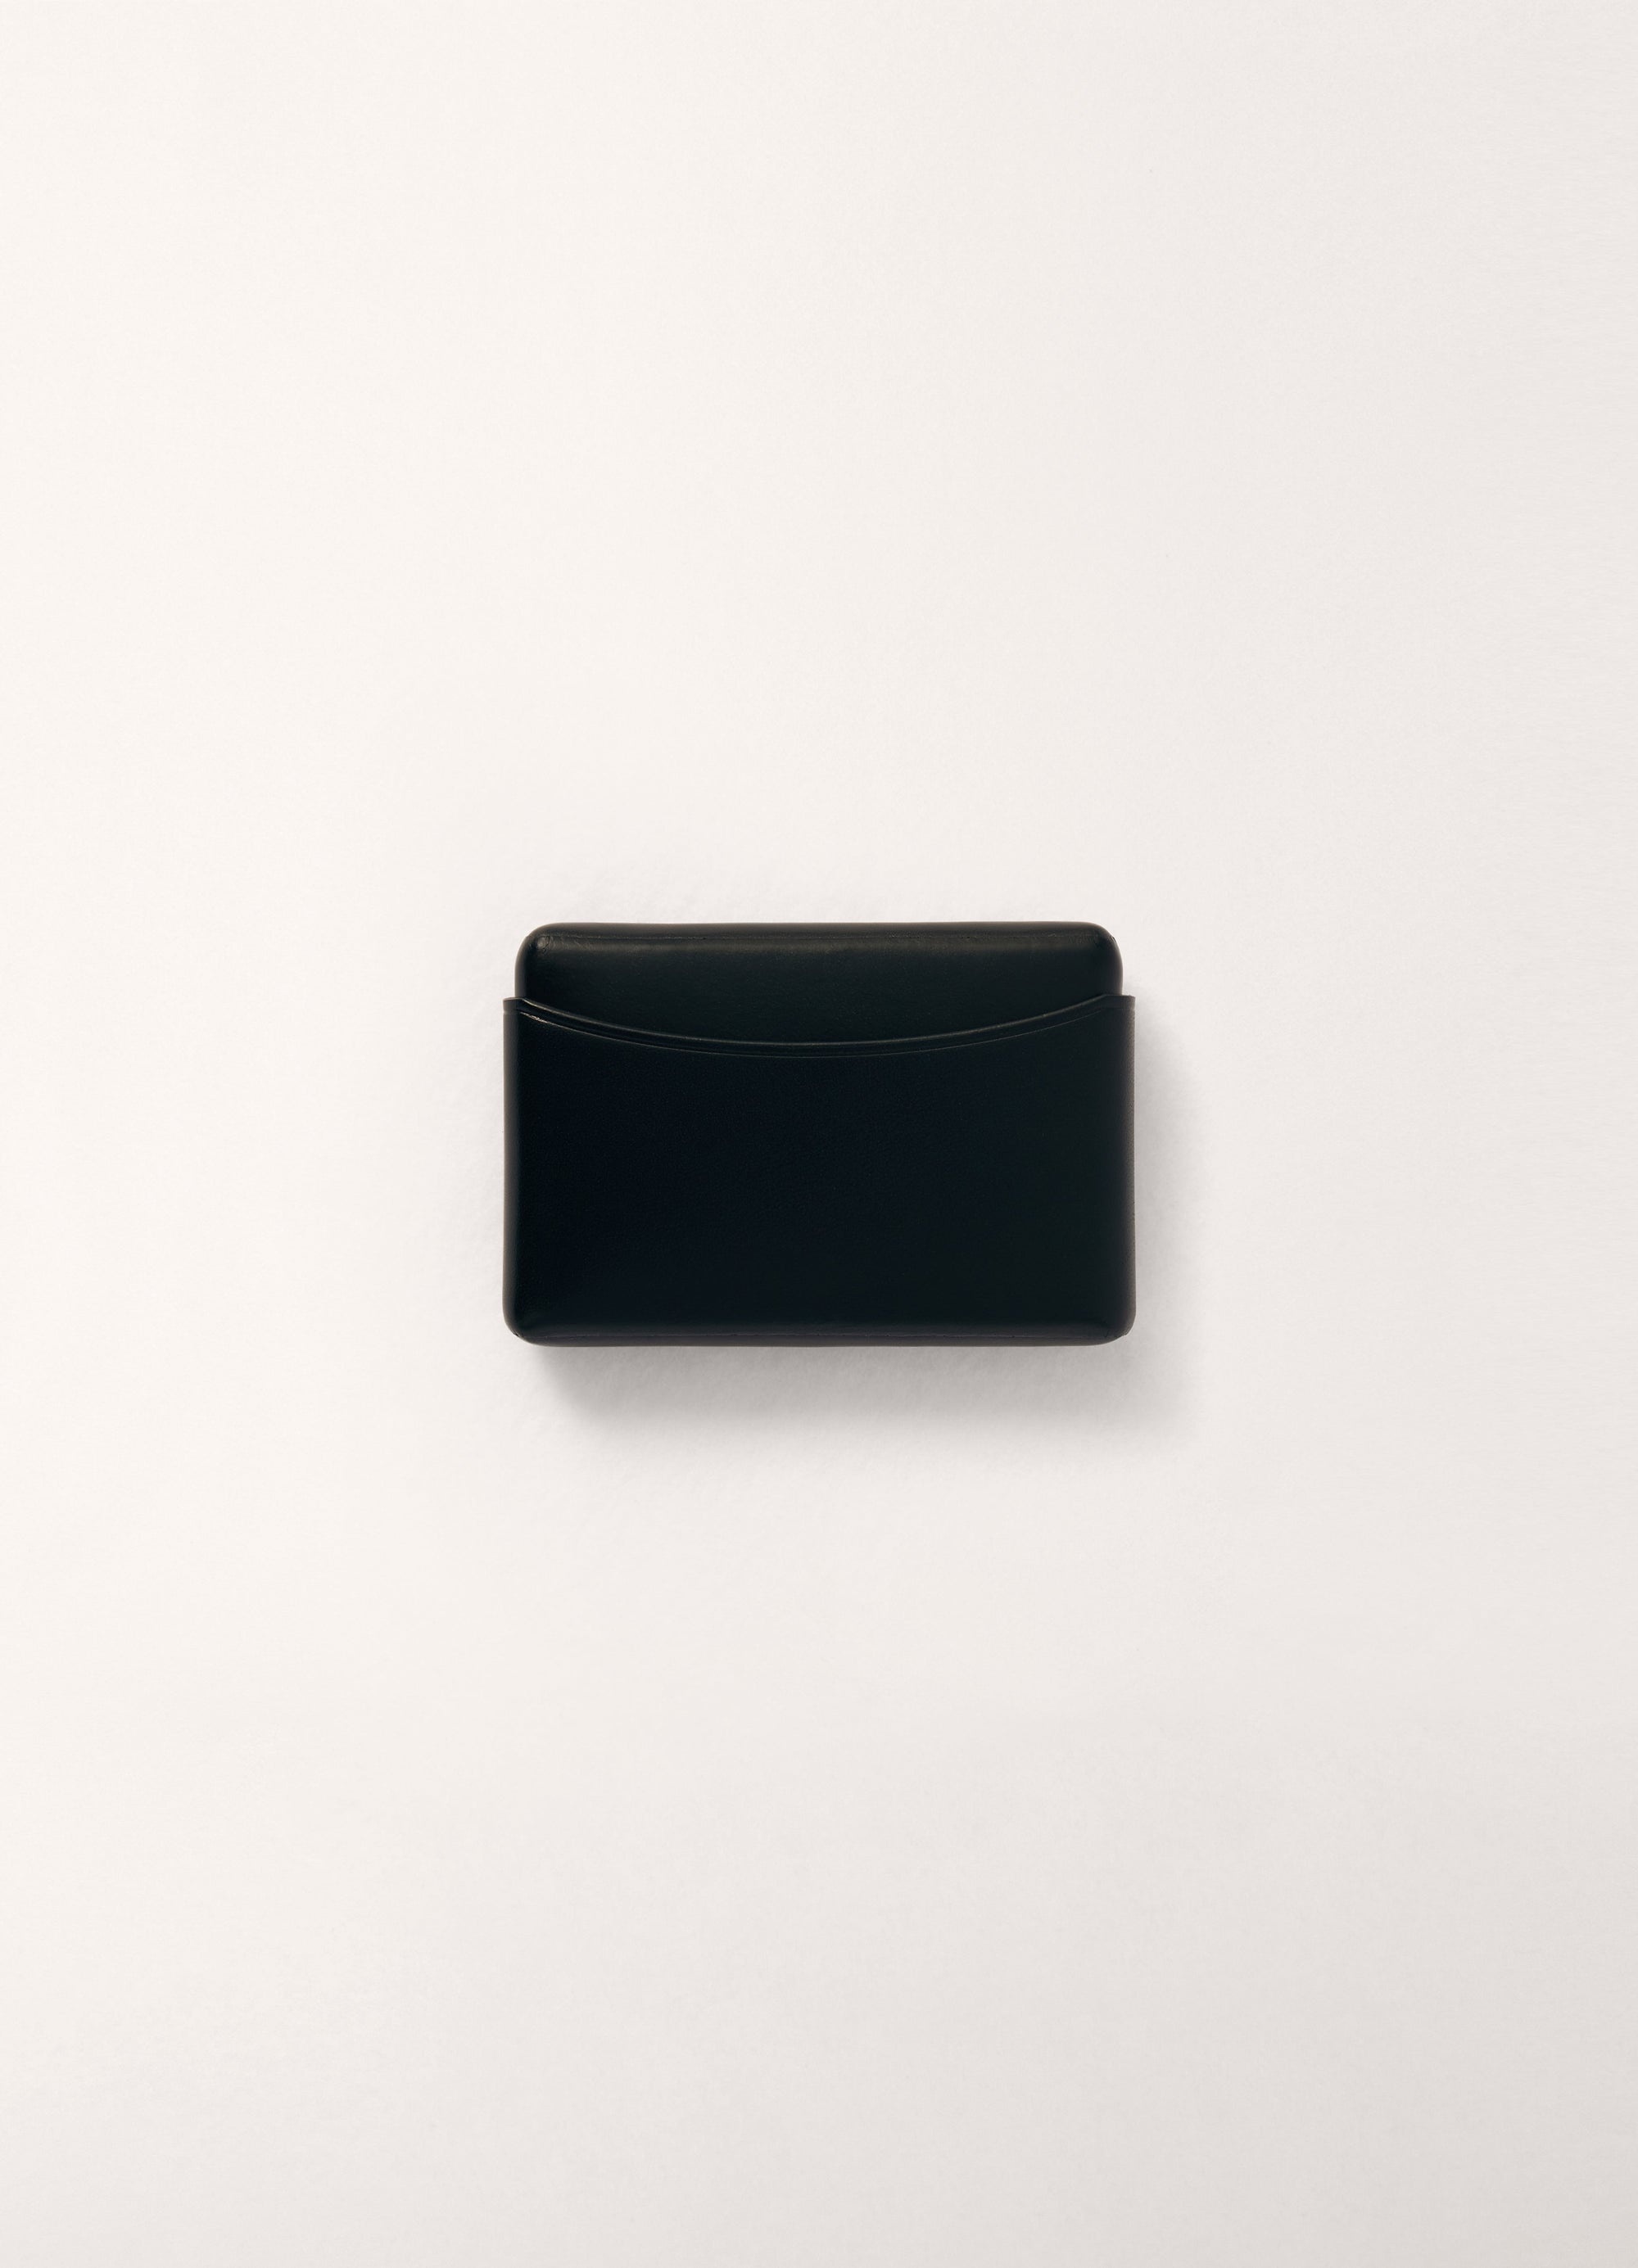 MOLDED CARD HOLDER
MOLDED CALF LEATHER - 1